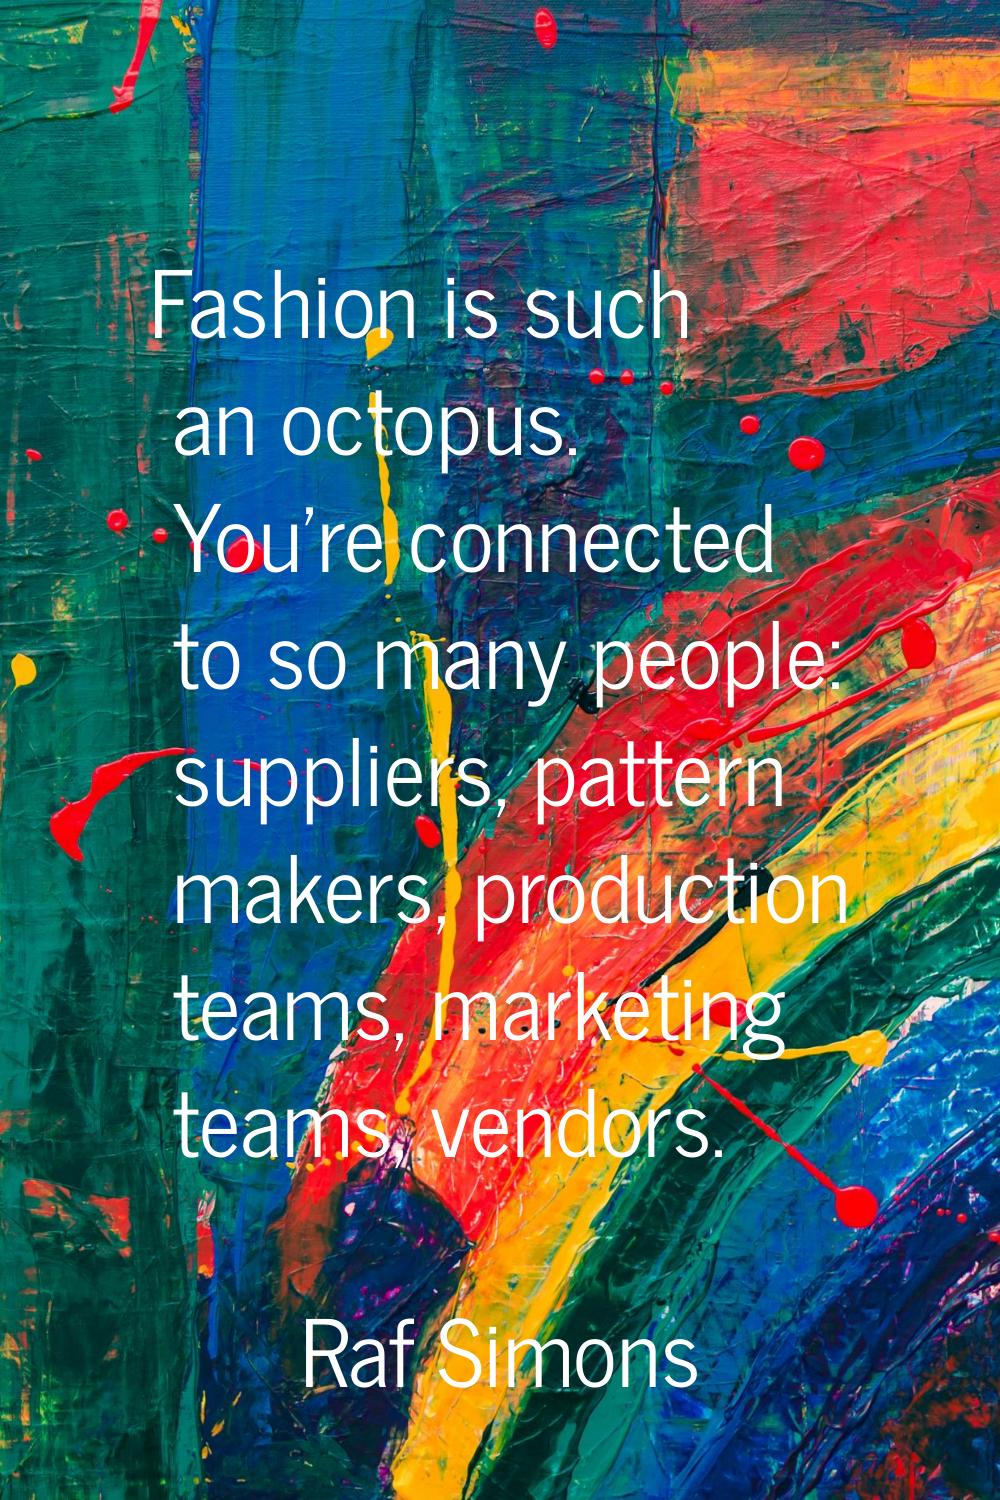 Fashion is such an octopus. You're connected to so many people: suppliers, pattern makers, producti